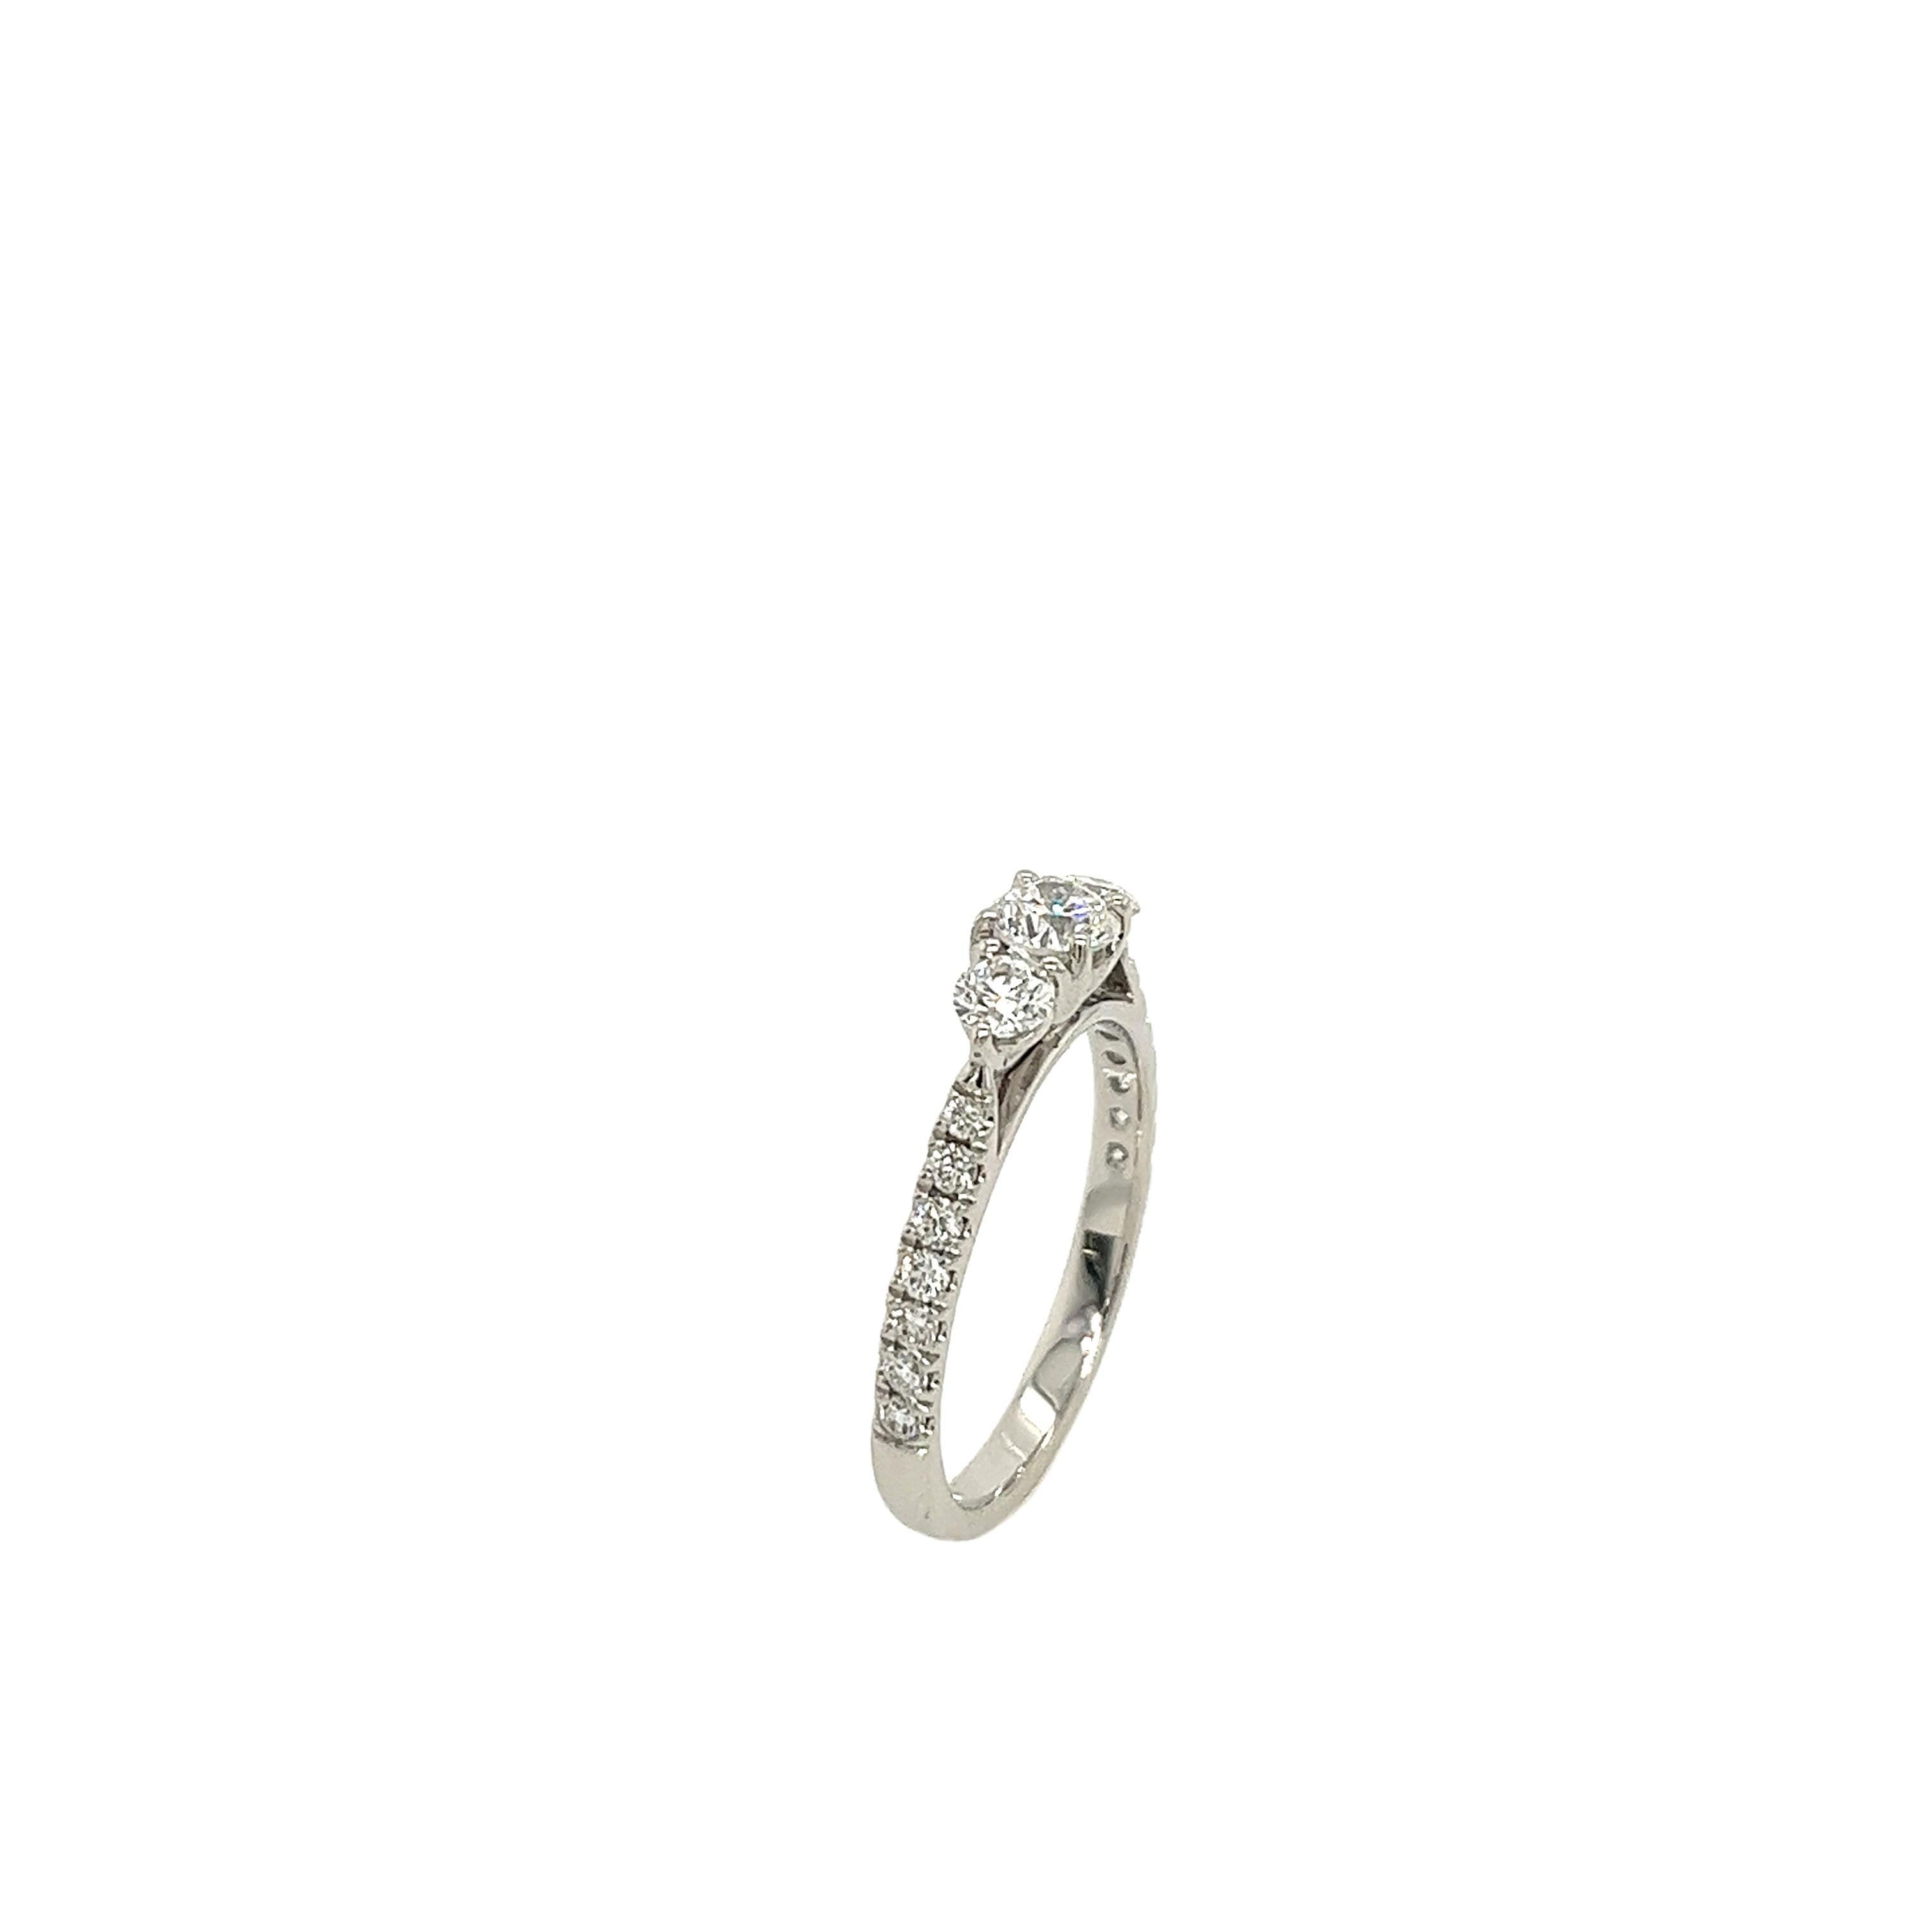 18ct White Gold 3 Stone Diamond Ring Set With 0.70carats of Diamonds In Excellent Condition For Sale In London, GB